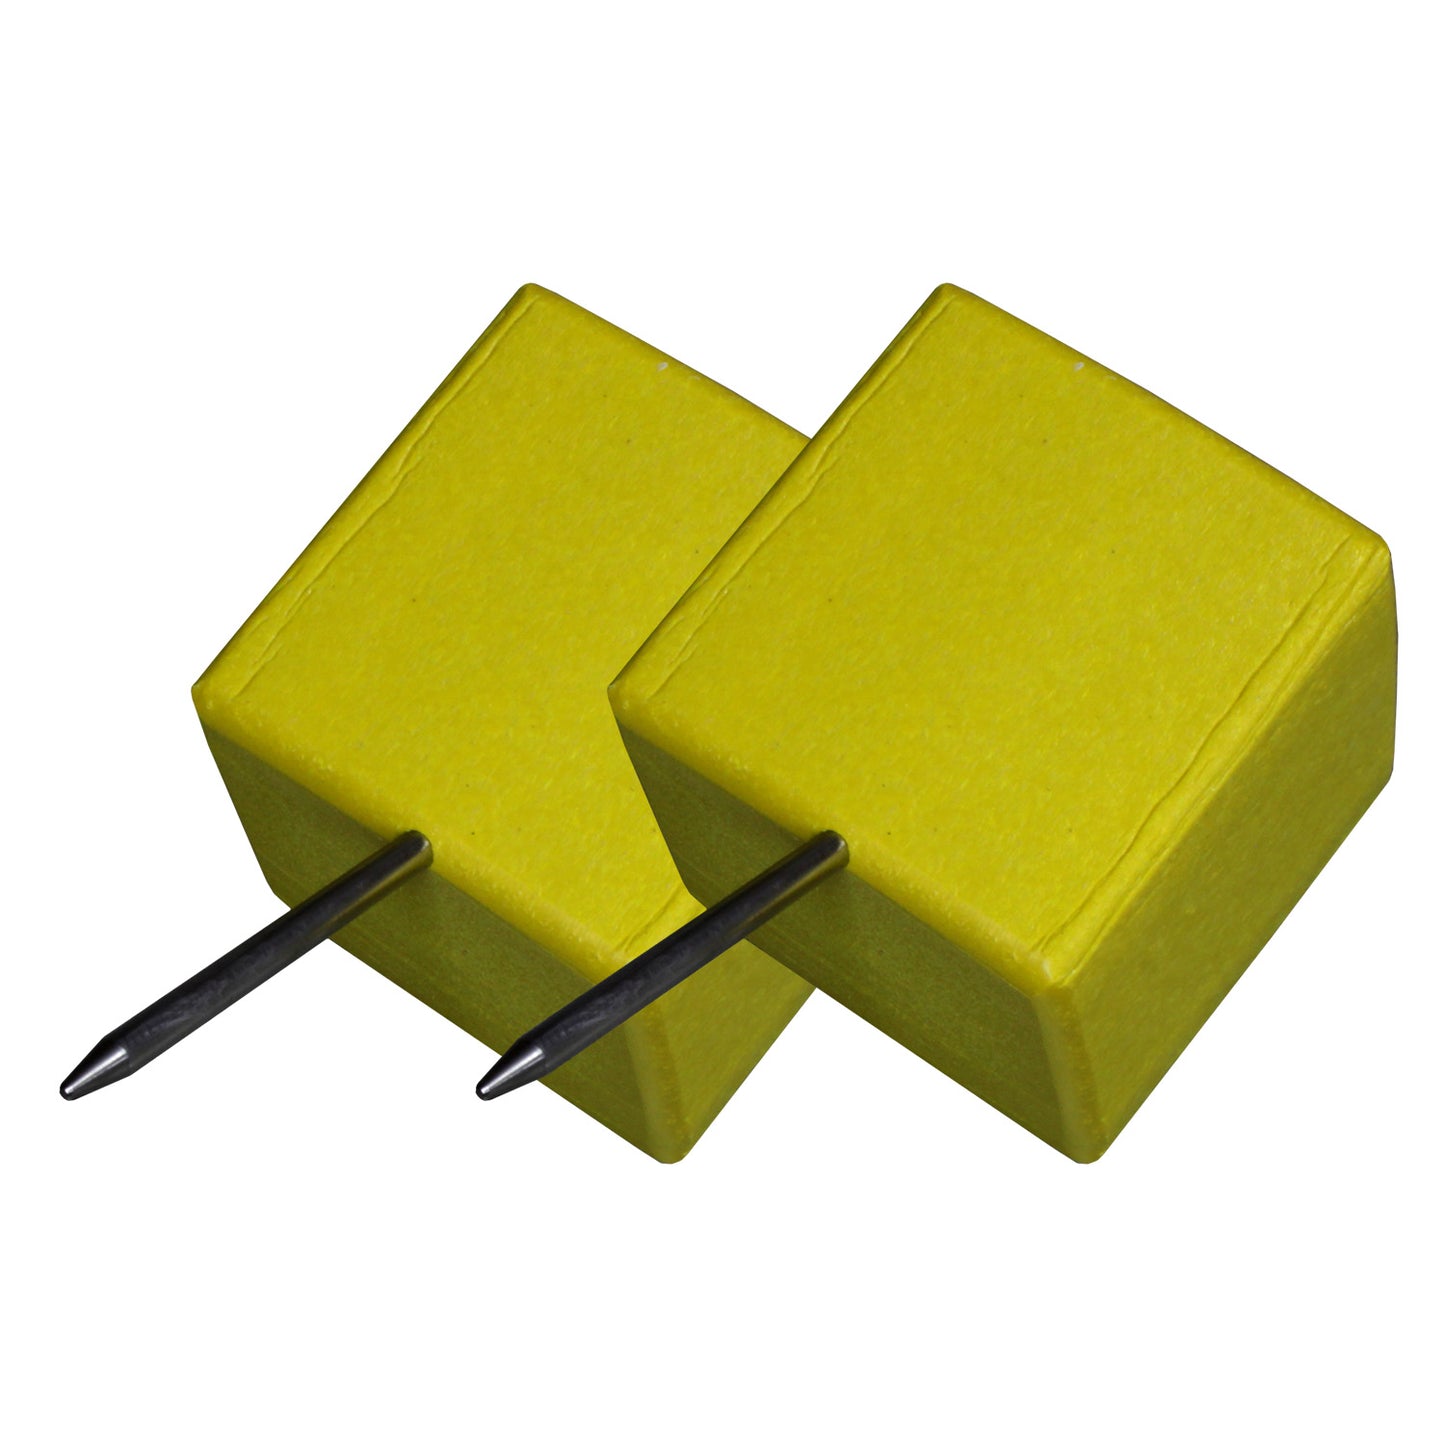 Clearance Cube Tee Markers - Set of 2